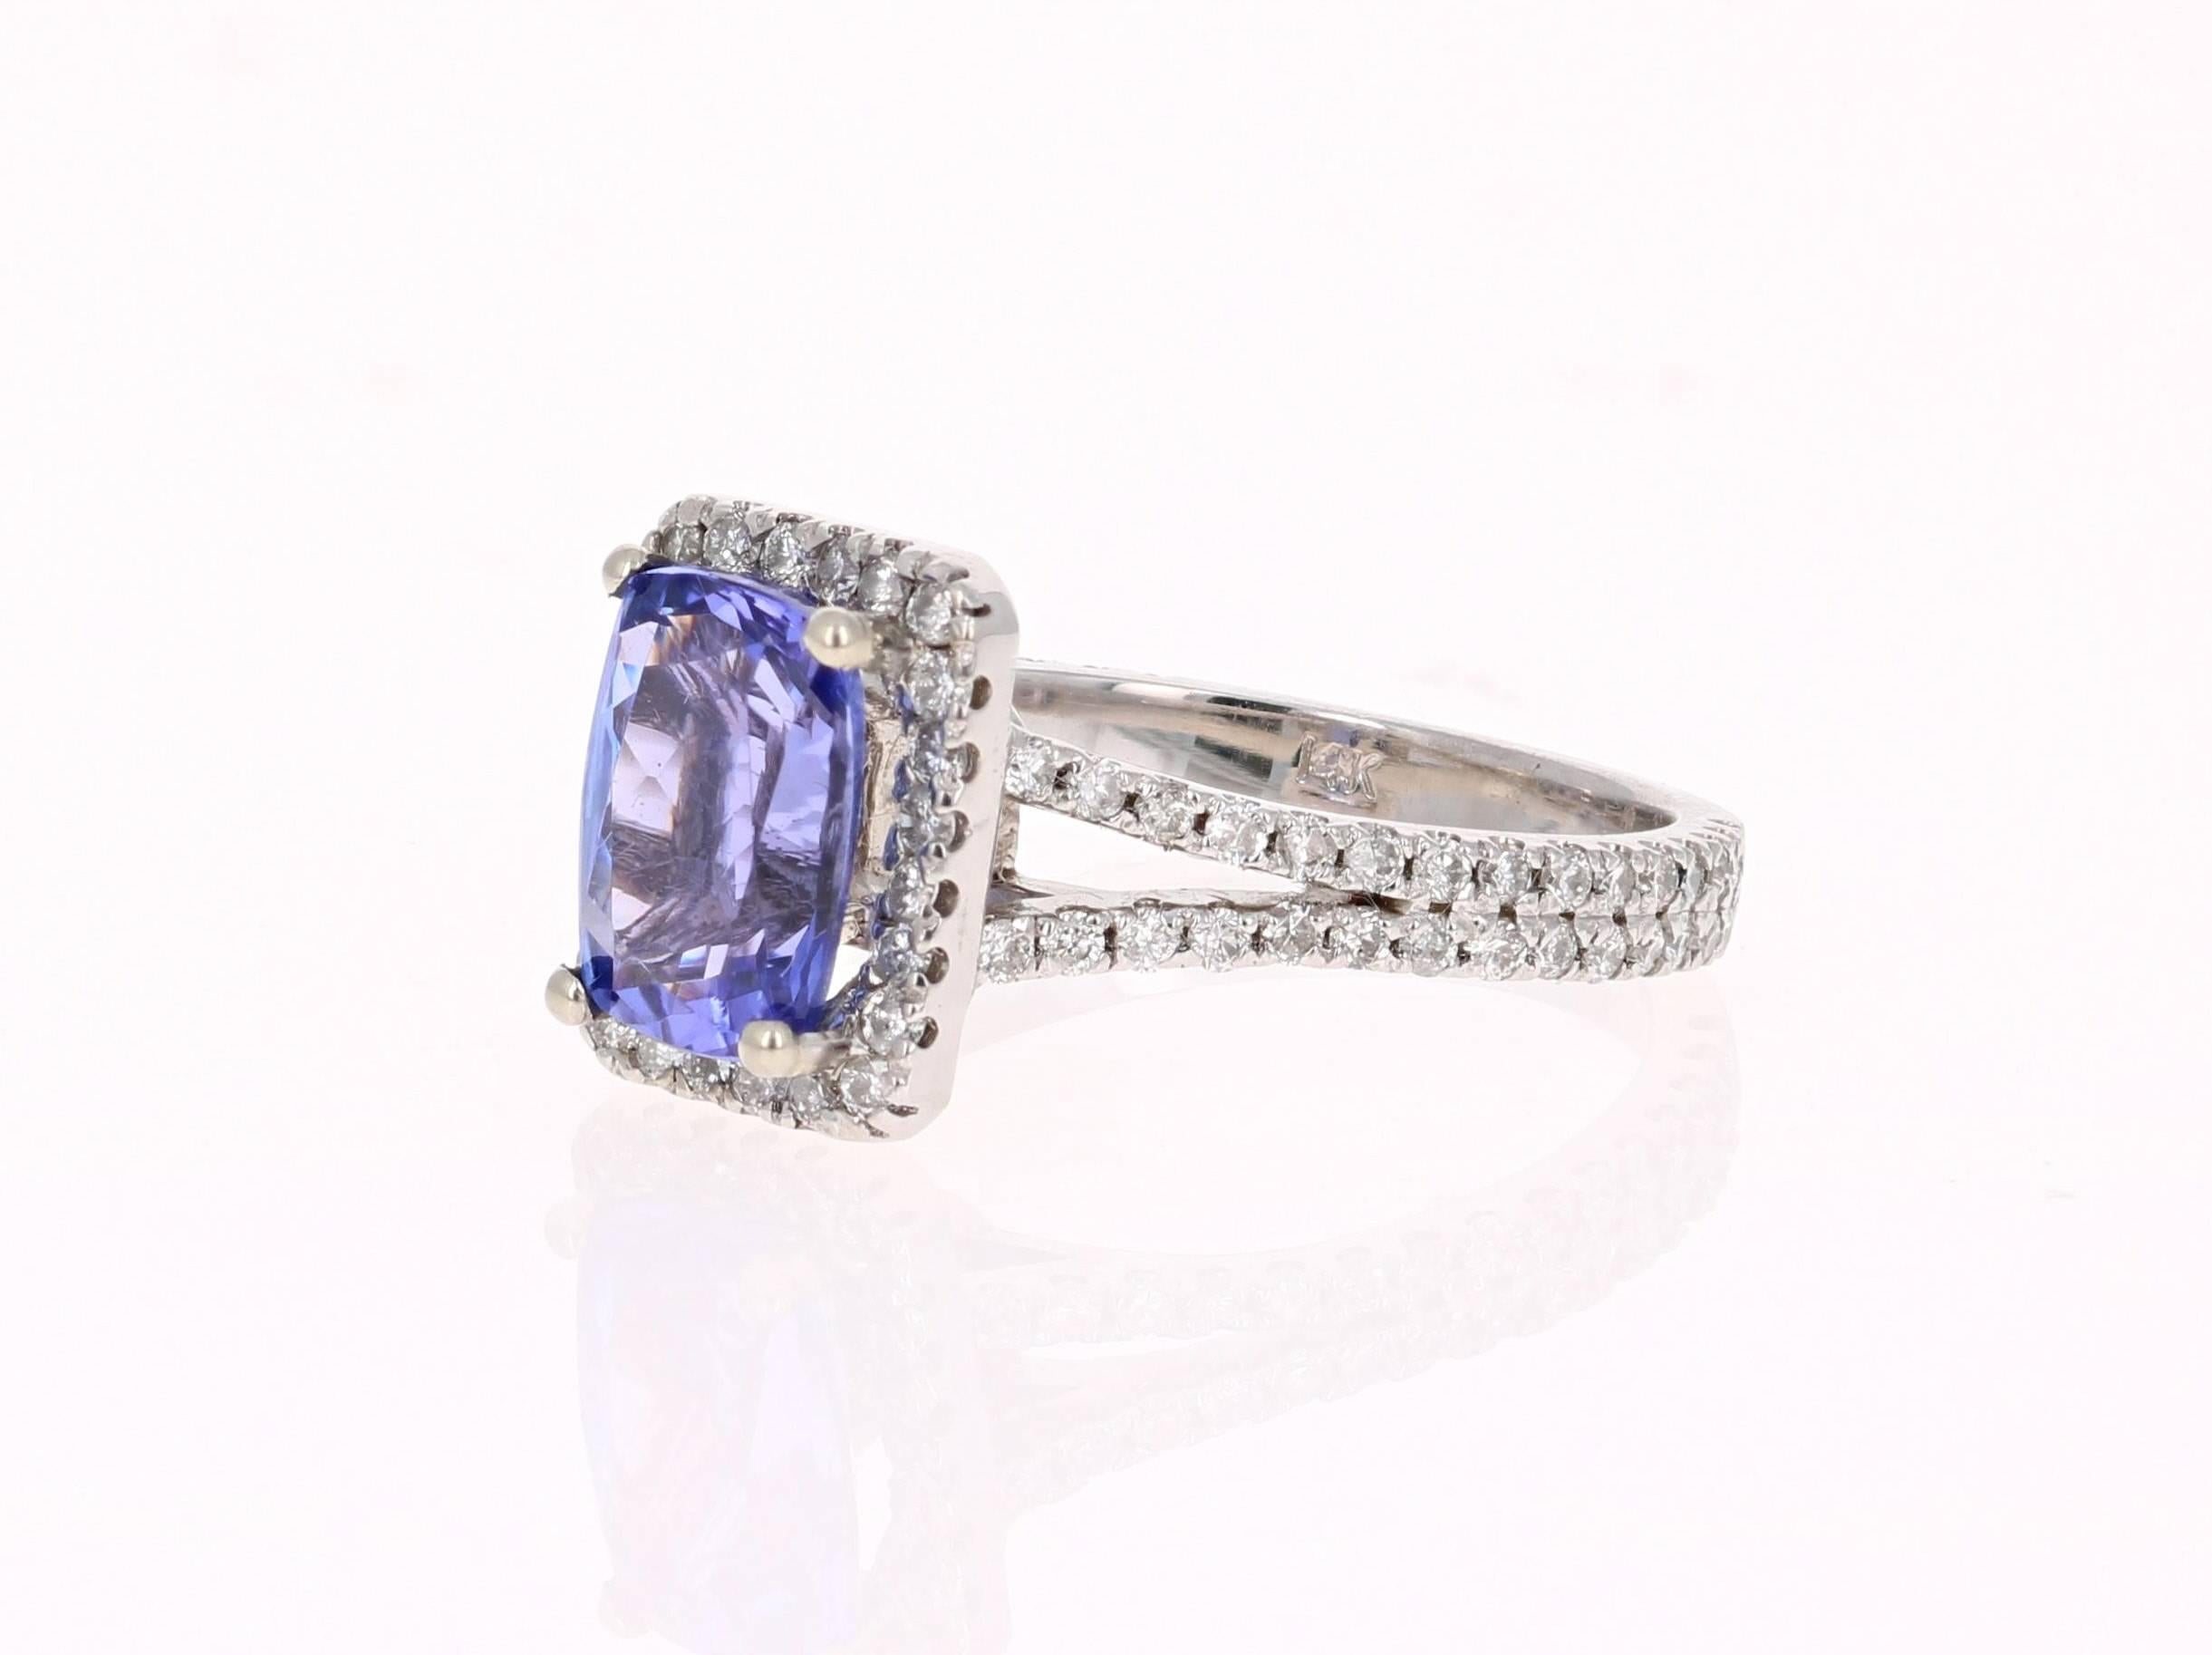 This Gorgeous Ring has a 2.06 Carat Tanzanite that is set in the center of the ring.  The Tanzanite is surrounded by a Halo of 93 Round Cut Diamonds that weigh 0.79 carats. The total carat weight of the ring is 2.85 carats.   

The ring is made in